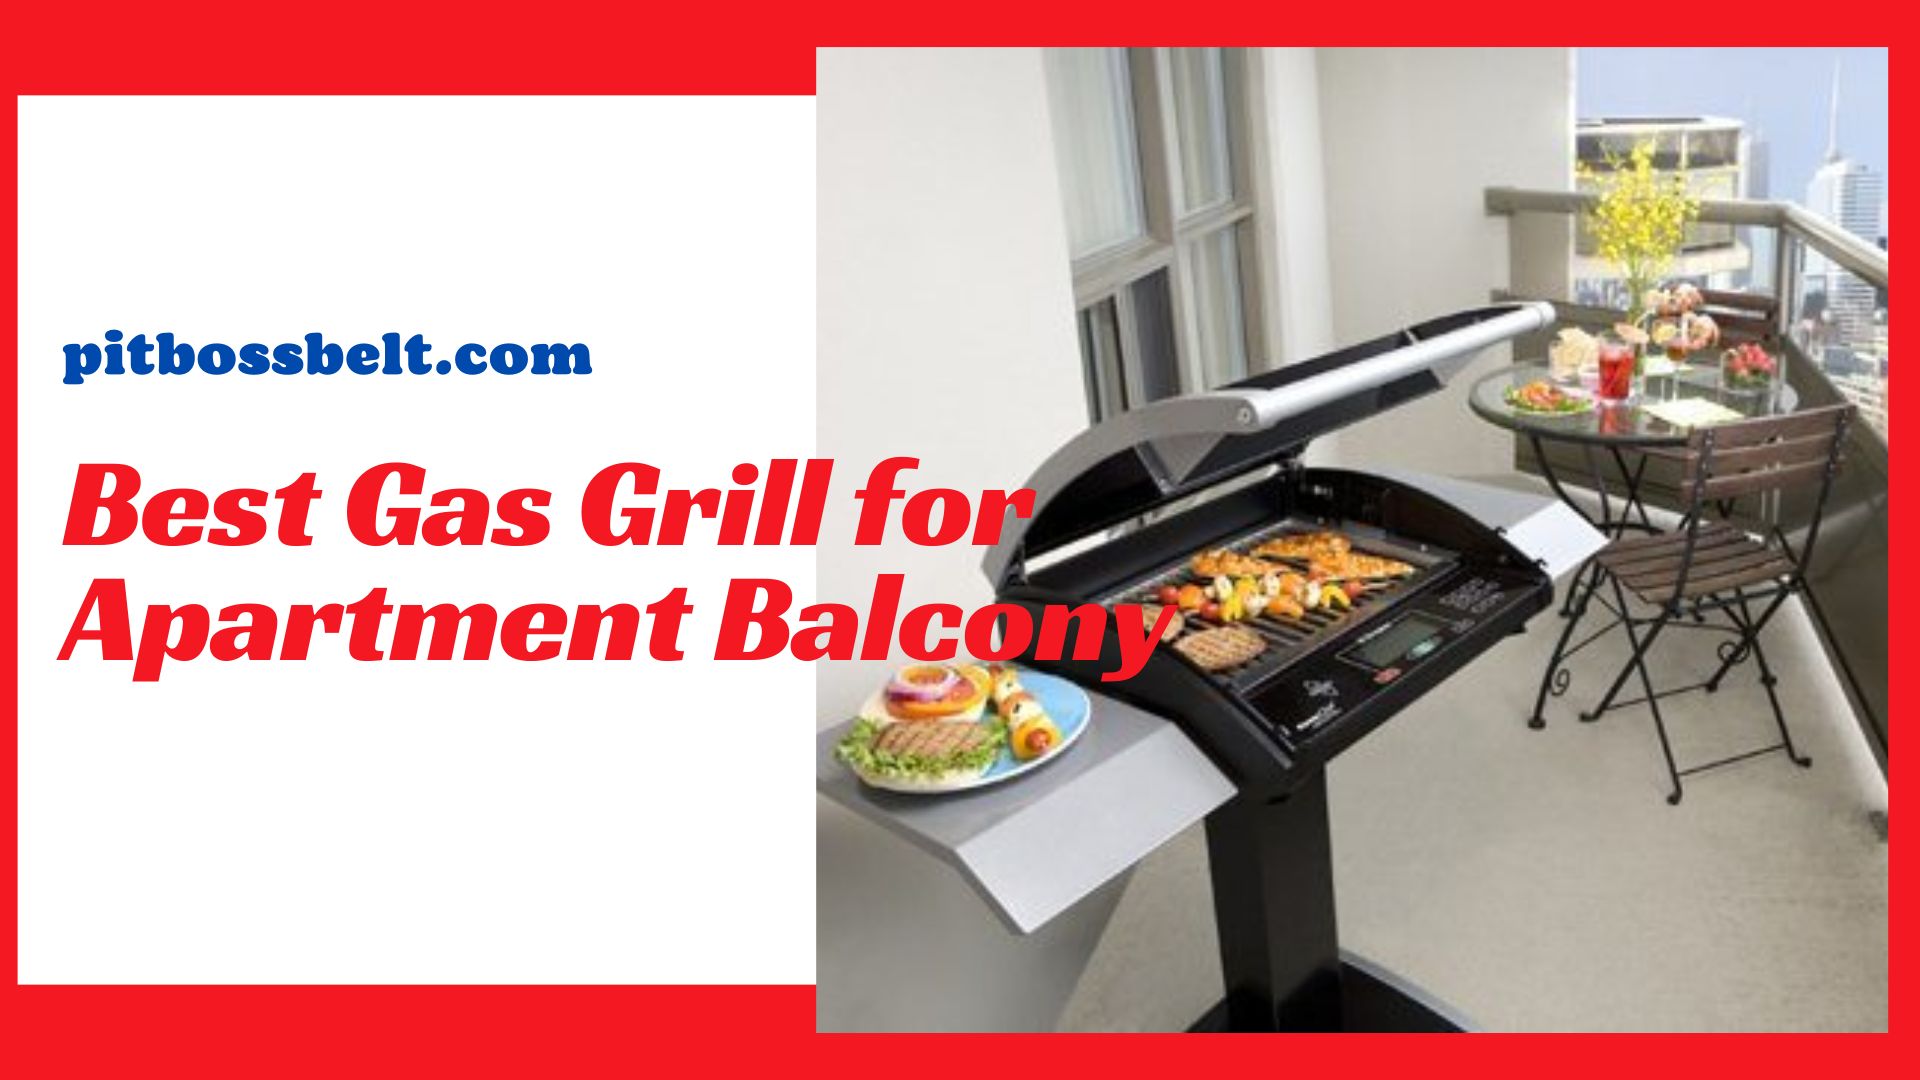 Best-Gas-Grill-for-Apartment-Balcony